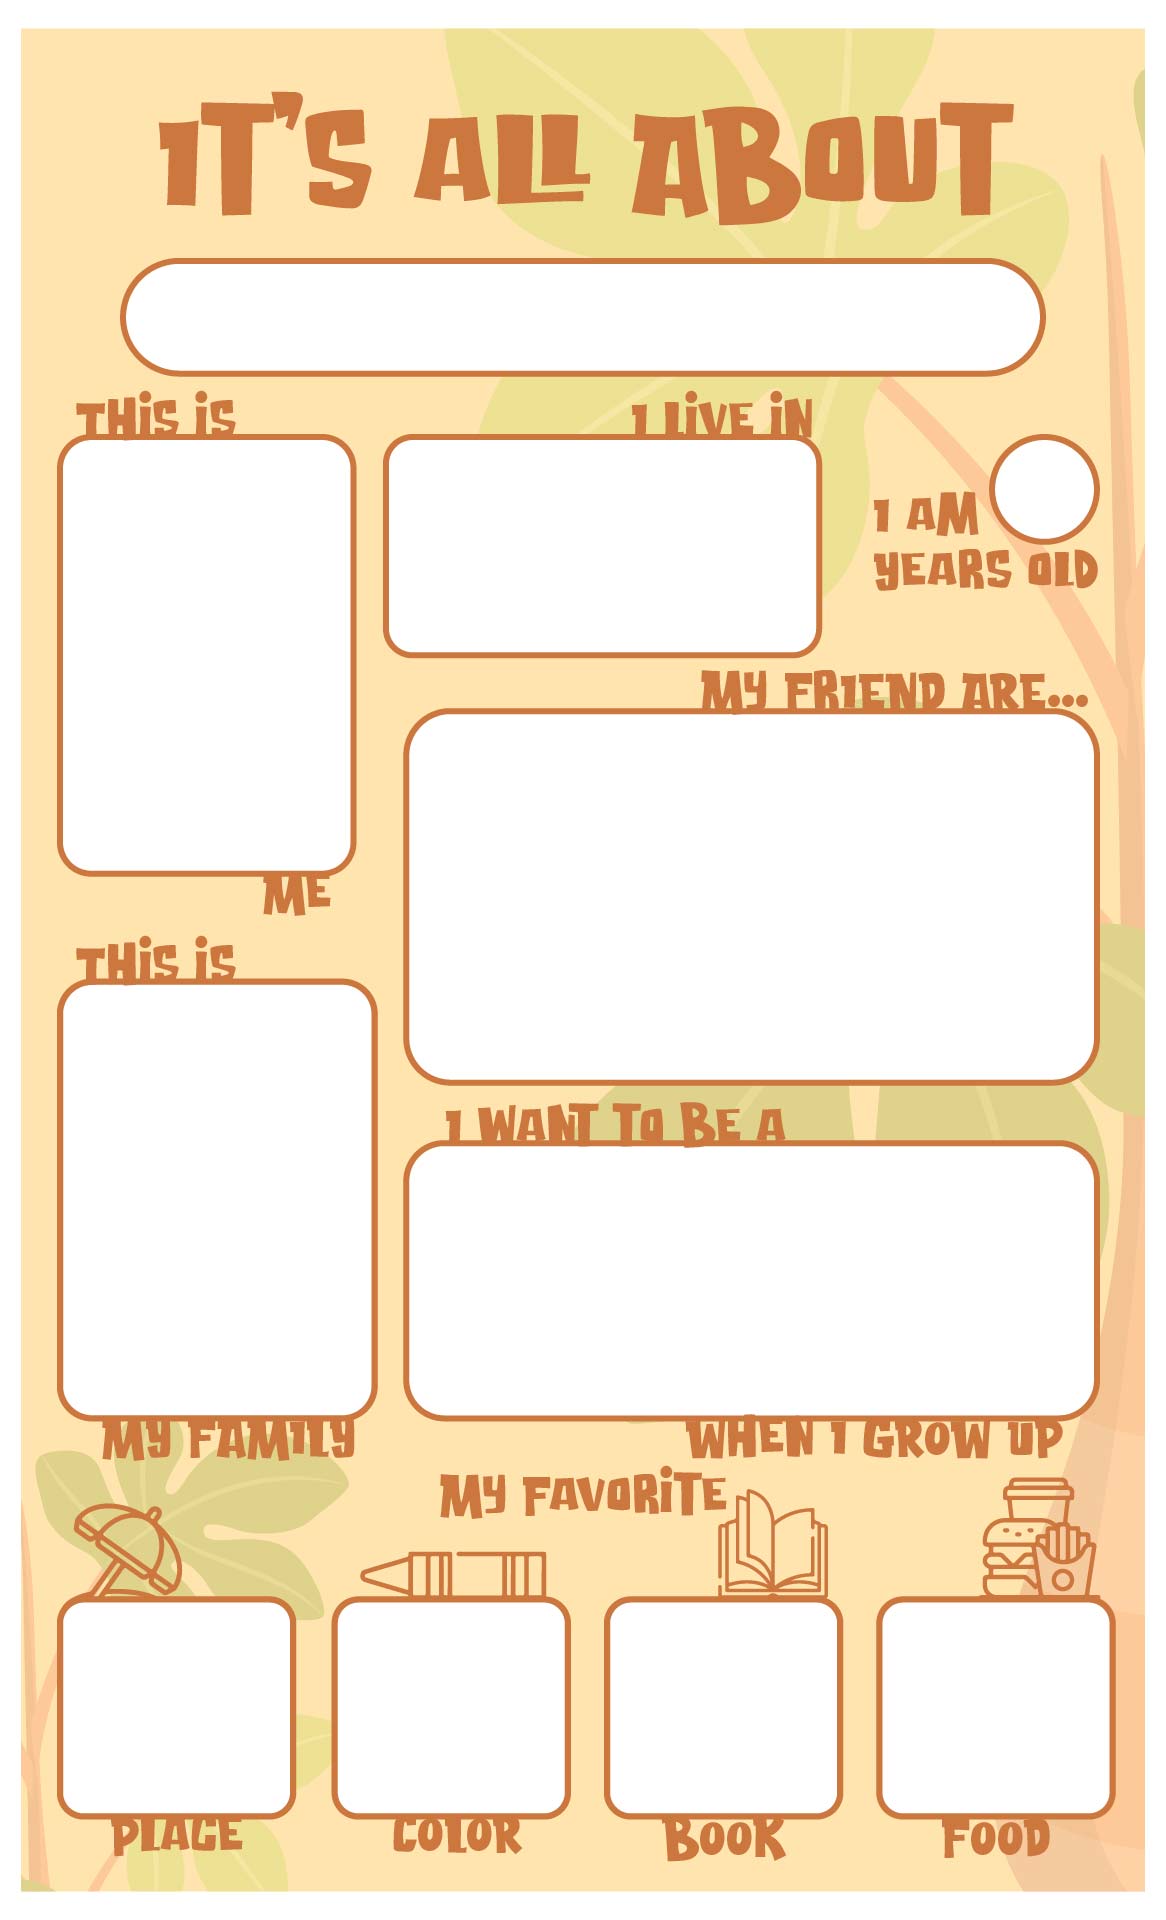 4-best-images-of-free-printable-all-about-me-form-for-teachers-secret